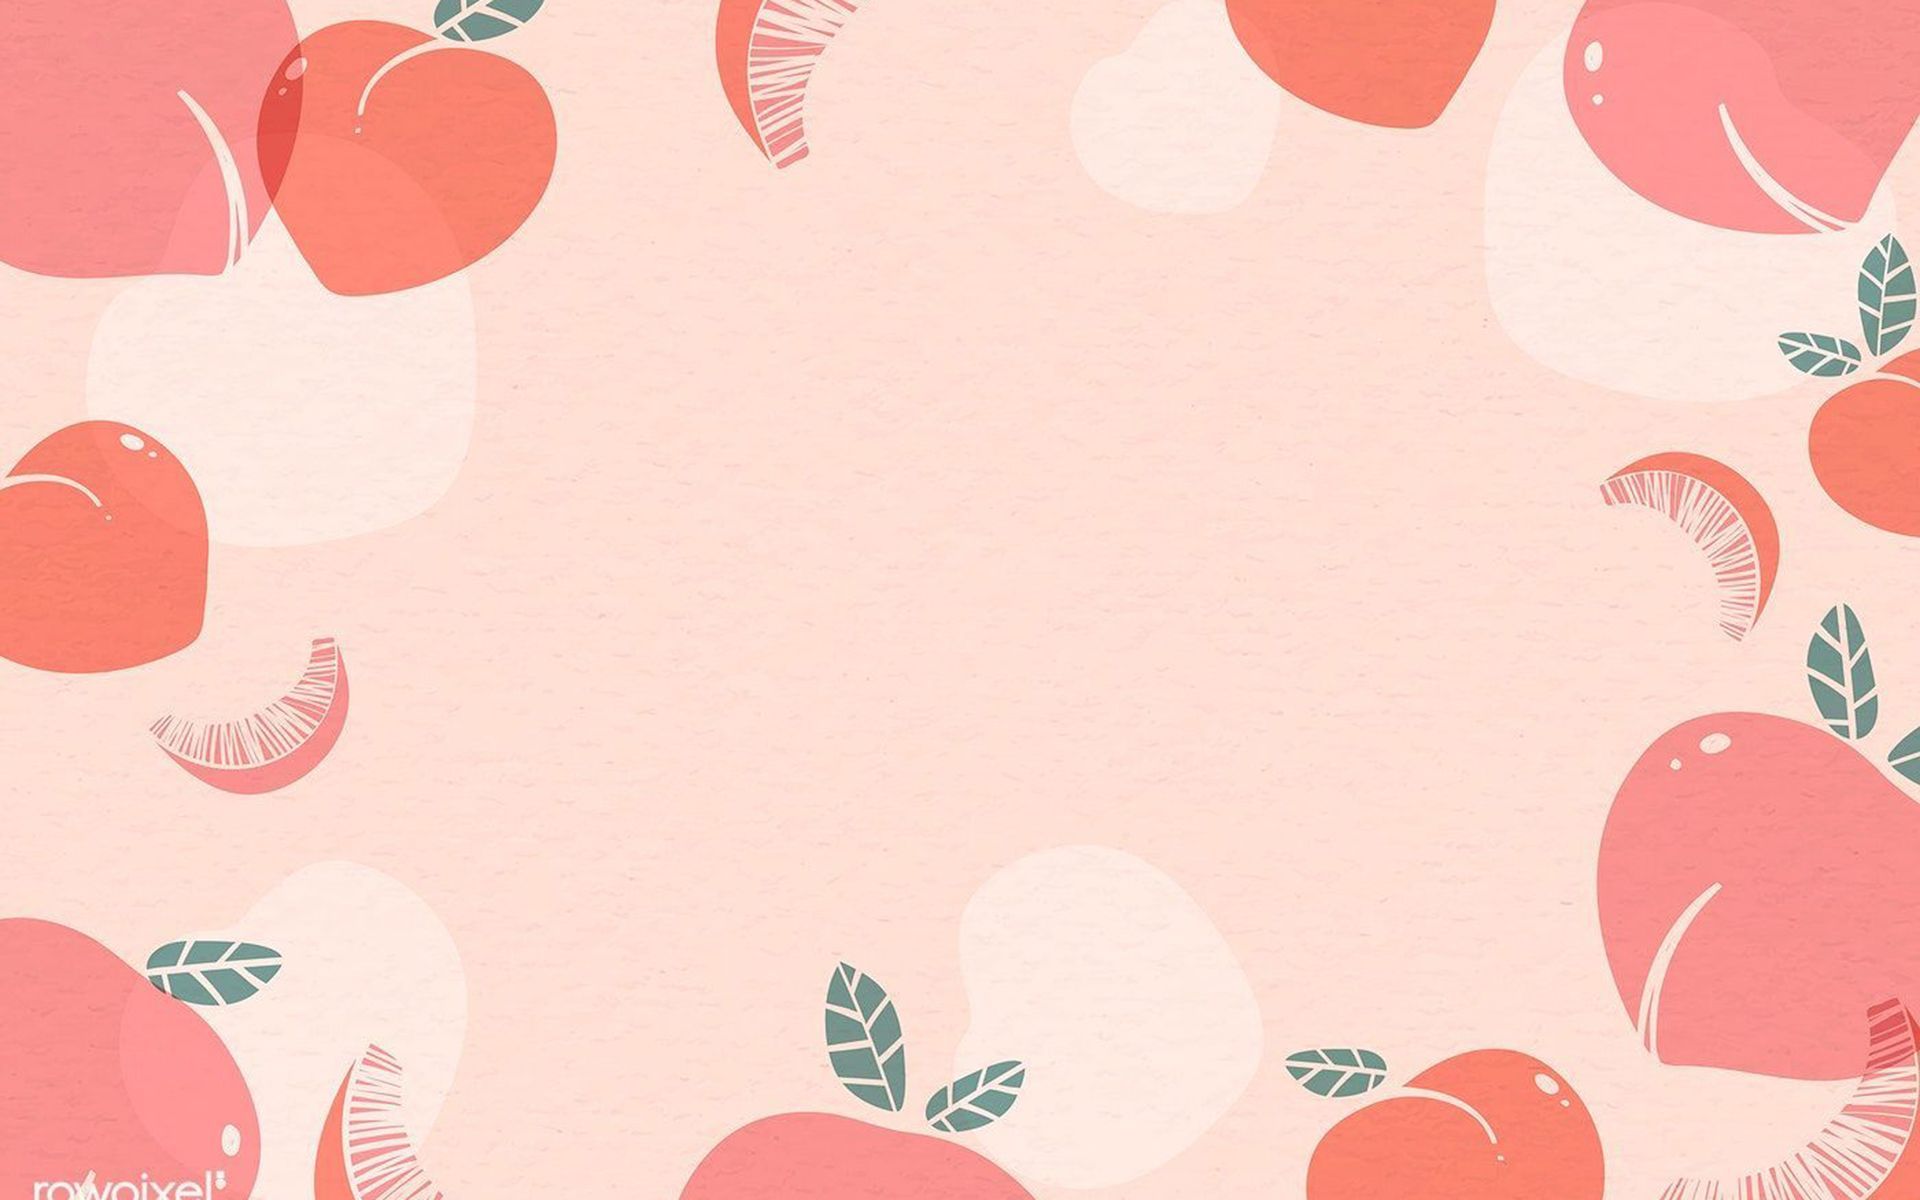 Download premium vector of Hand drawn watercolor peaches on a pink background - Desktop, peach